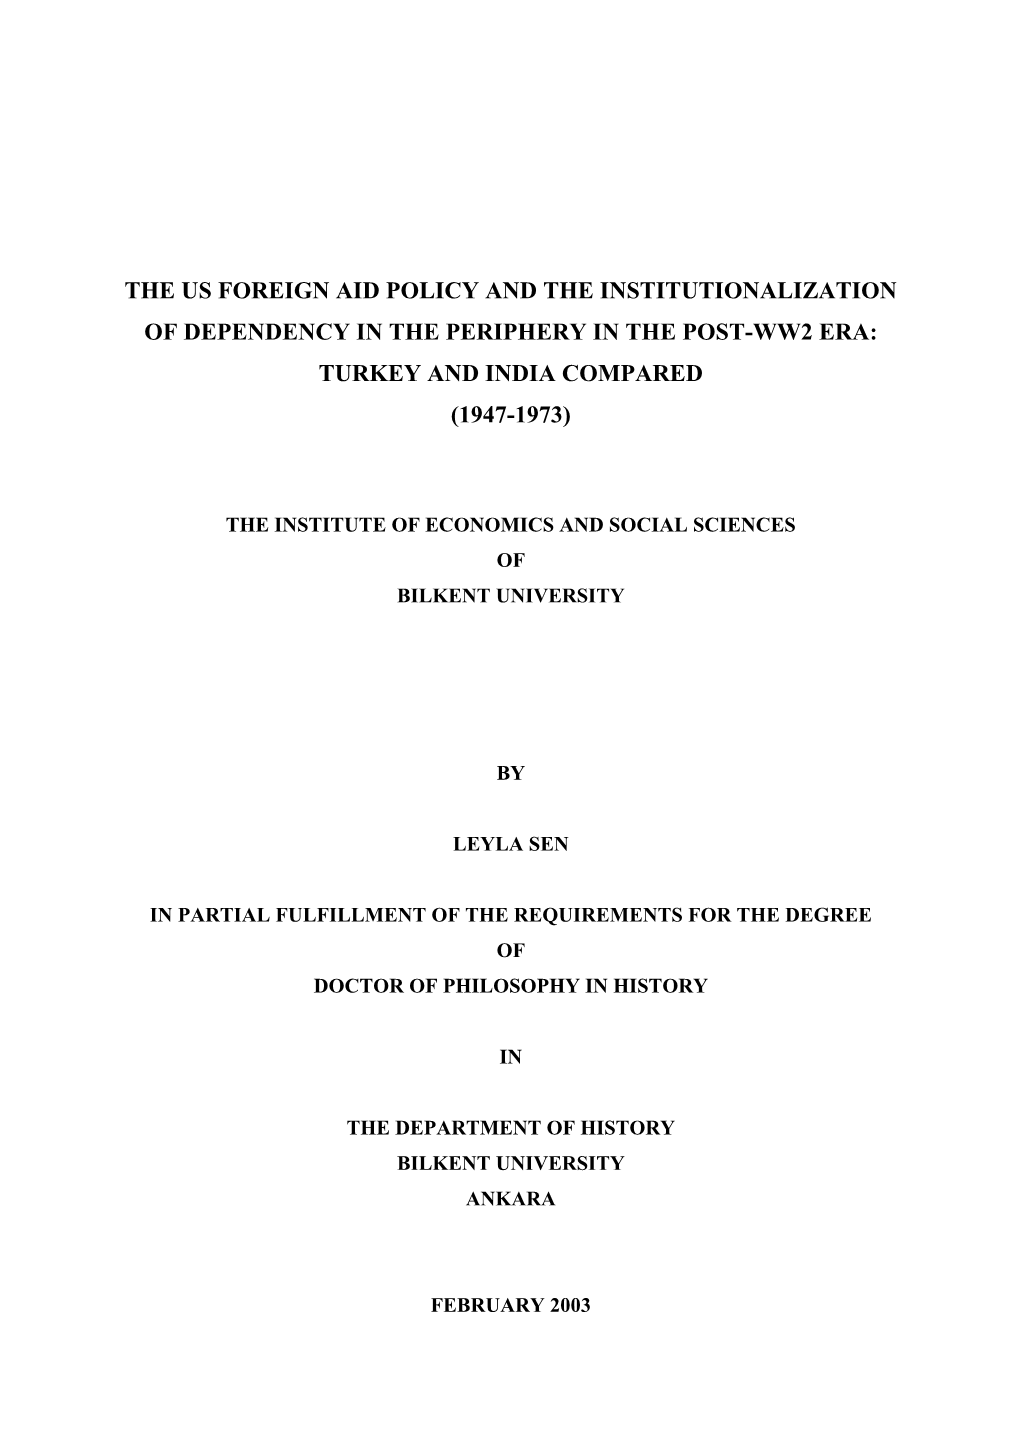 The Us Foreign Aid Policy and the Institutionalization of Dependency in the Periphery in the Post-Ww2 Era: Turkey and India Compared (1947-1973)